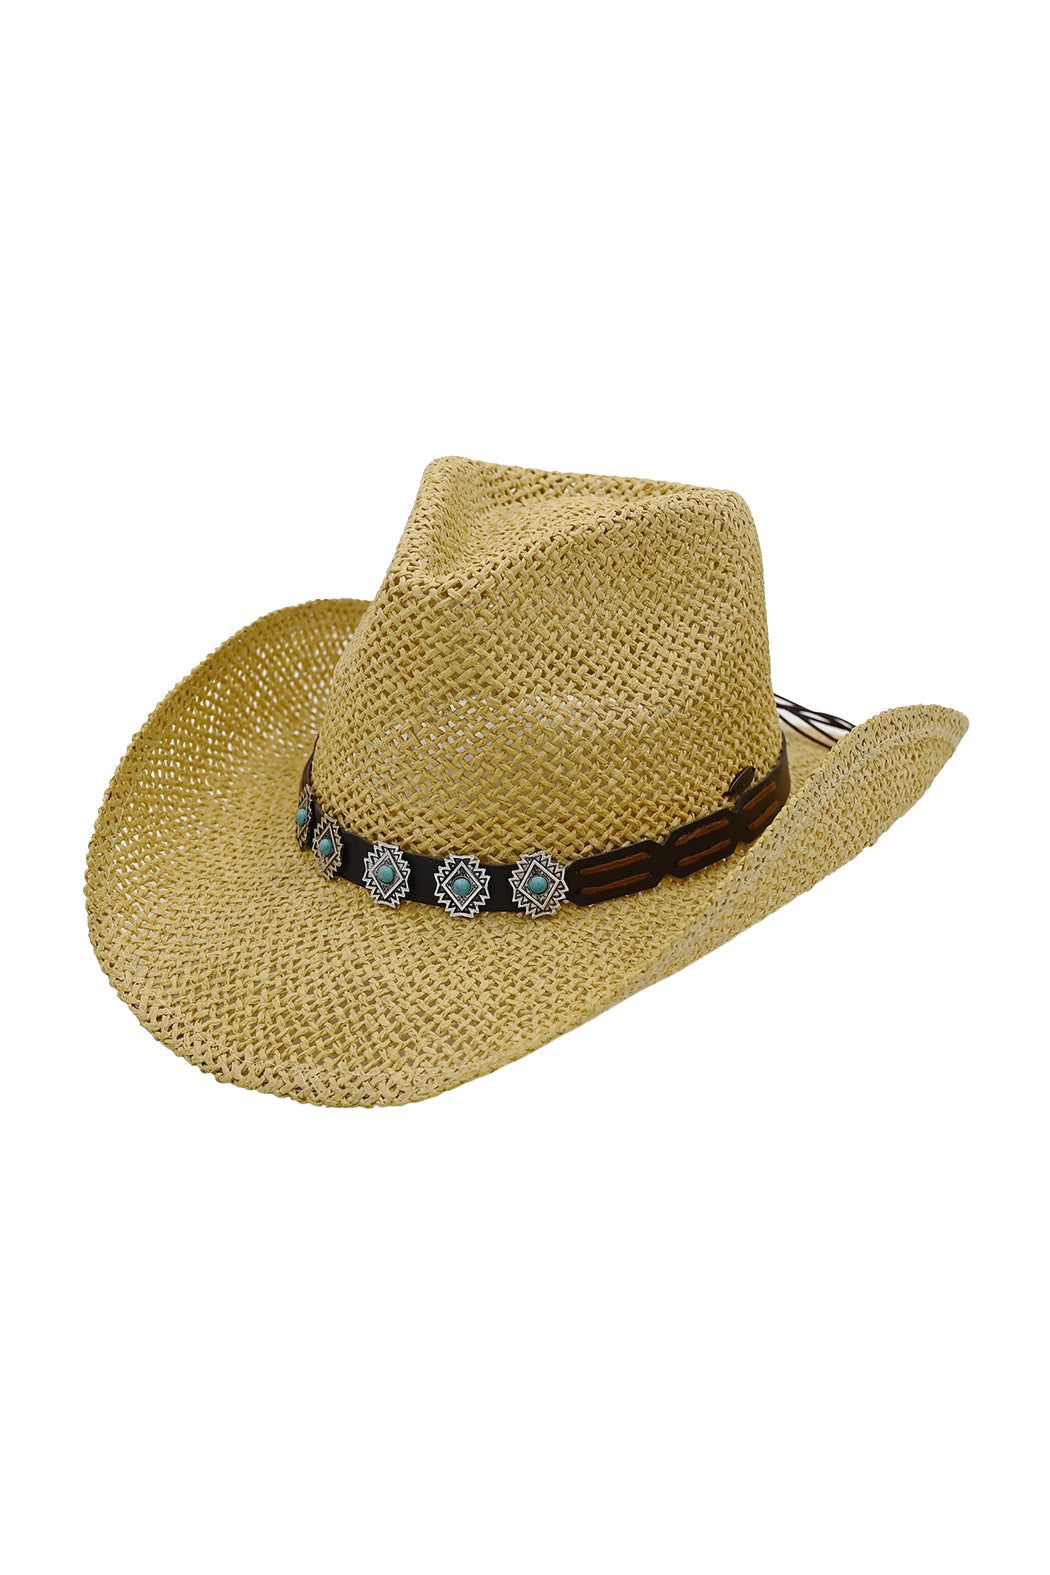 Silver and Turquoise Aztec Straw Cowgirl Hat